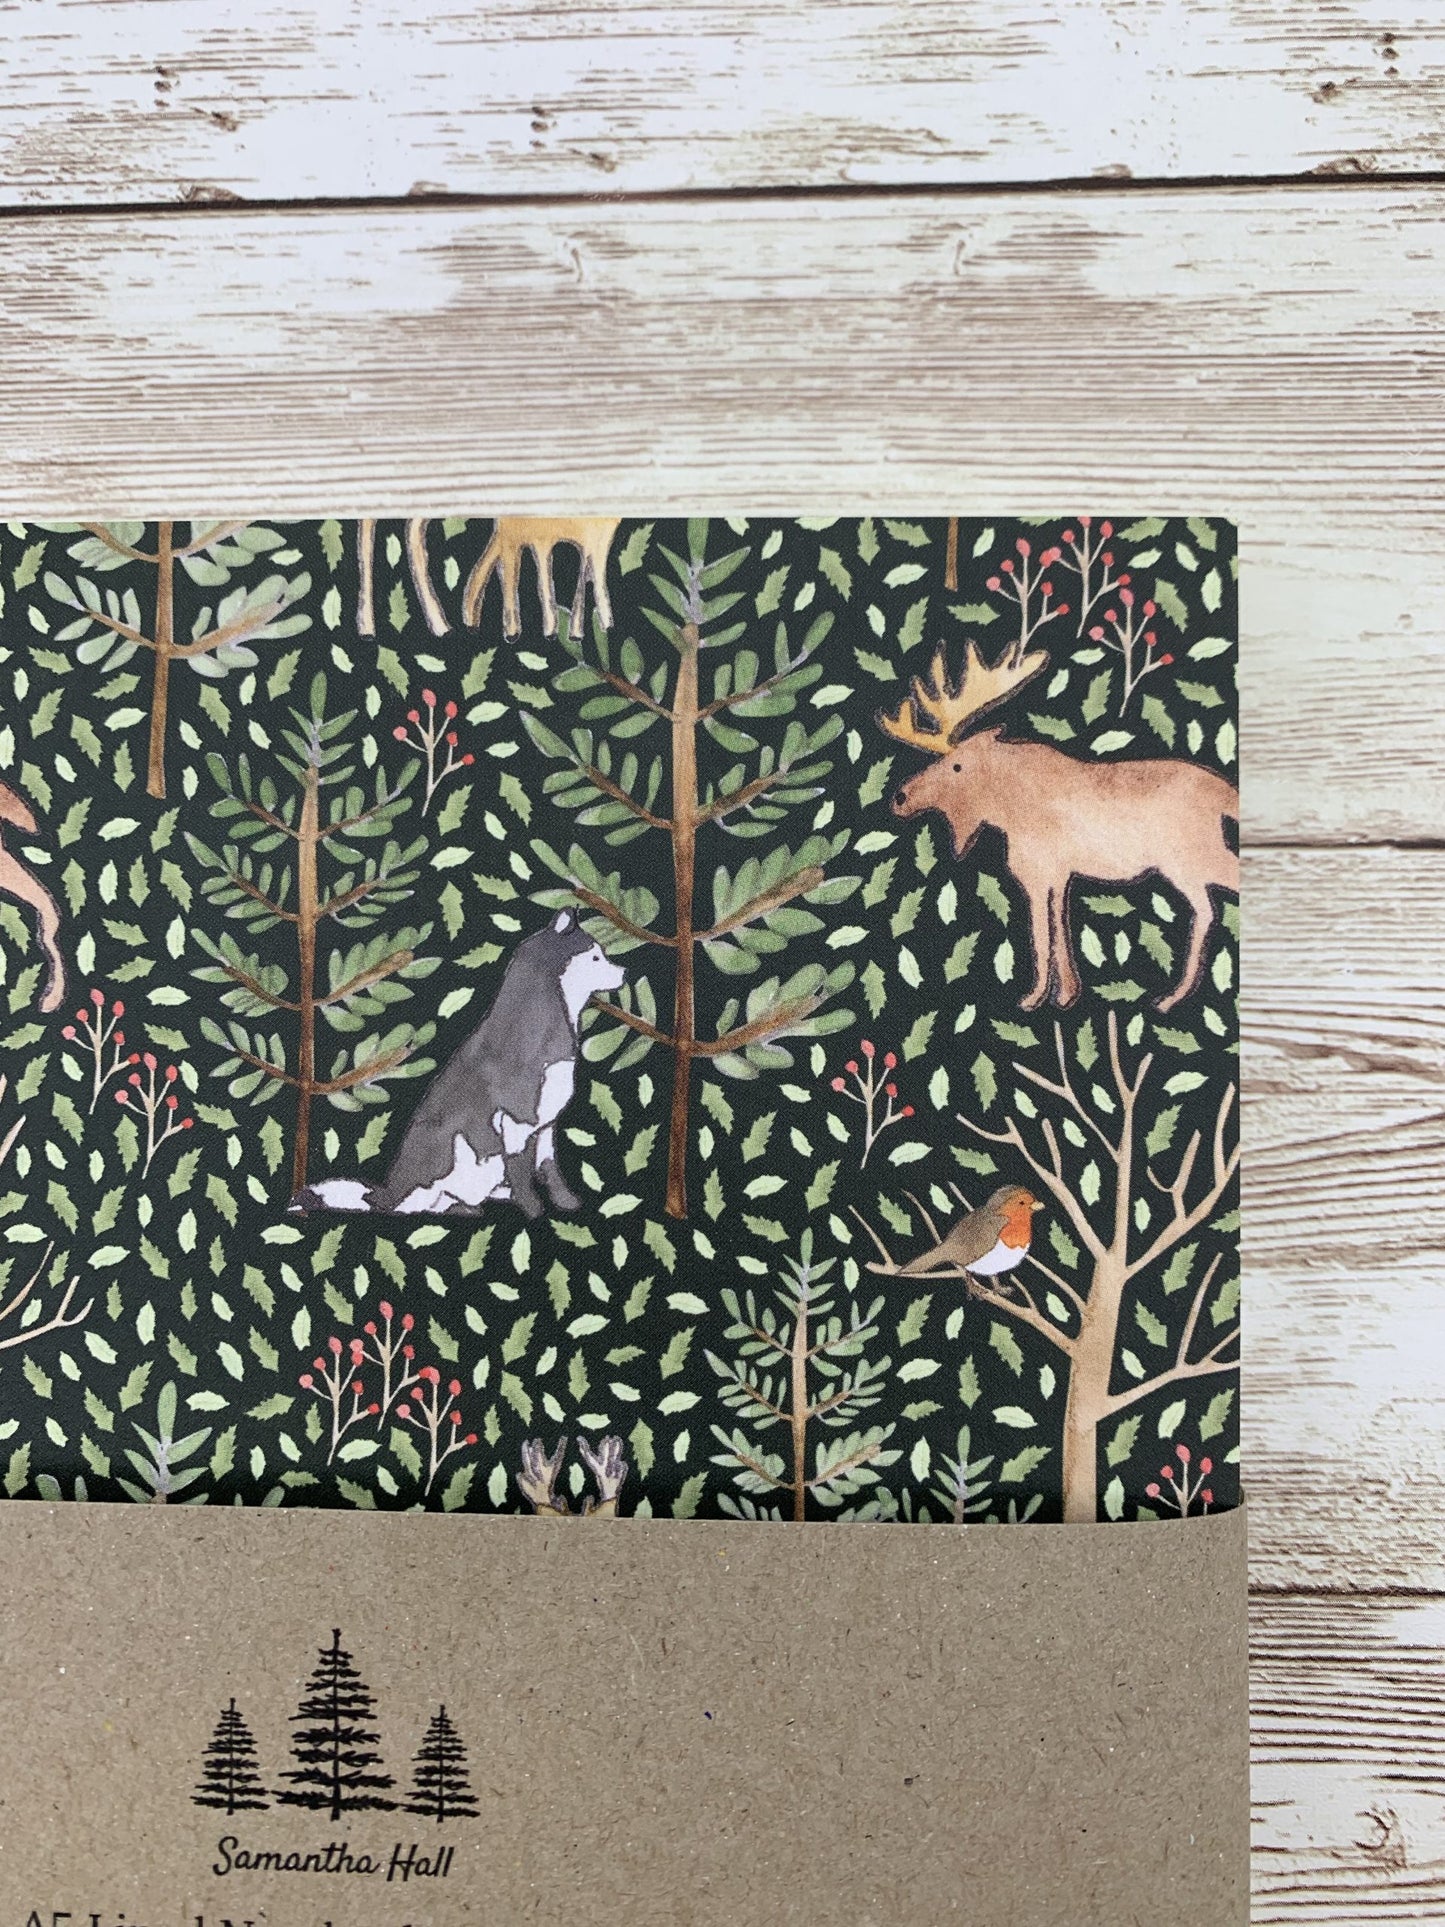 Animals of the Forest notebook gift set